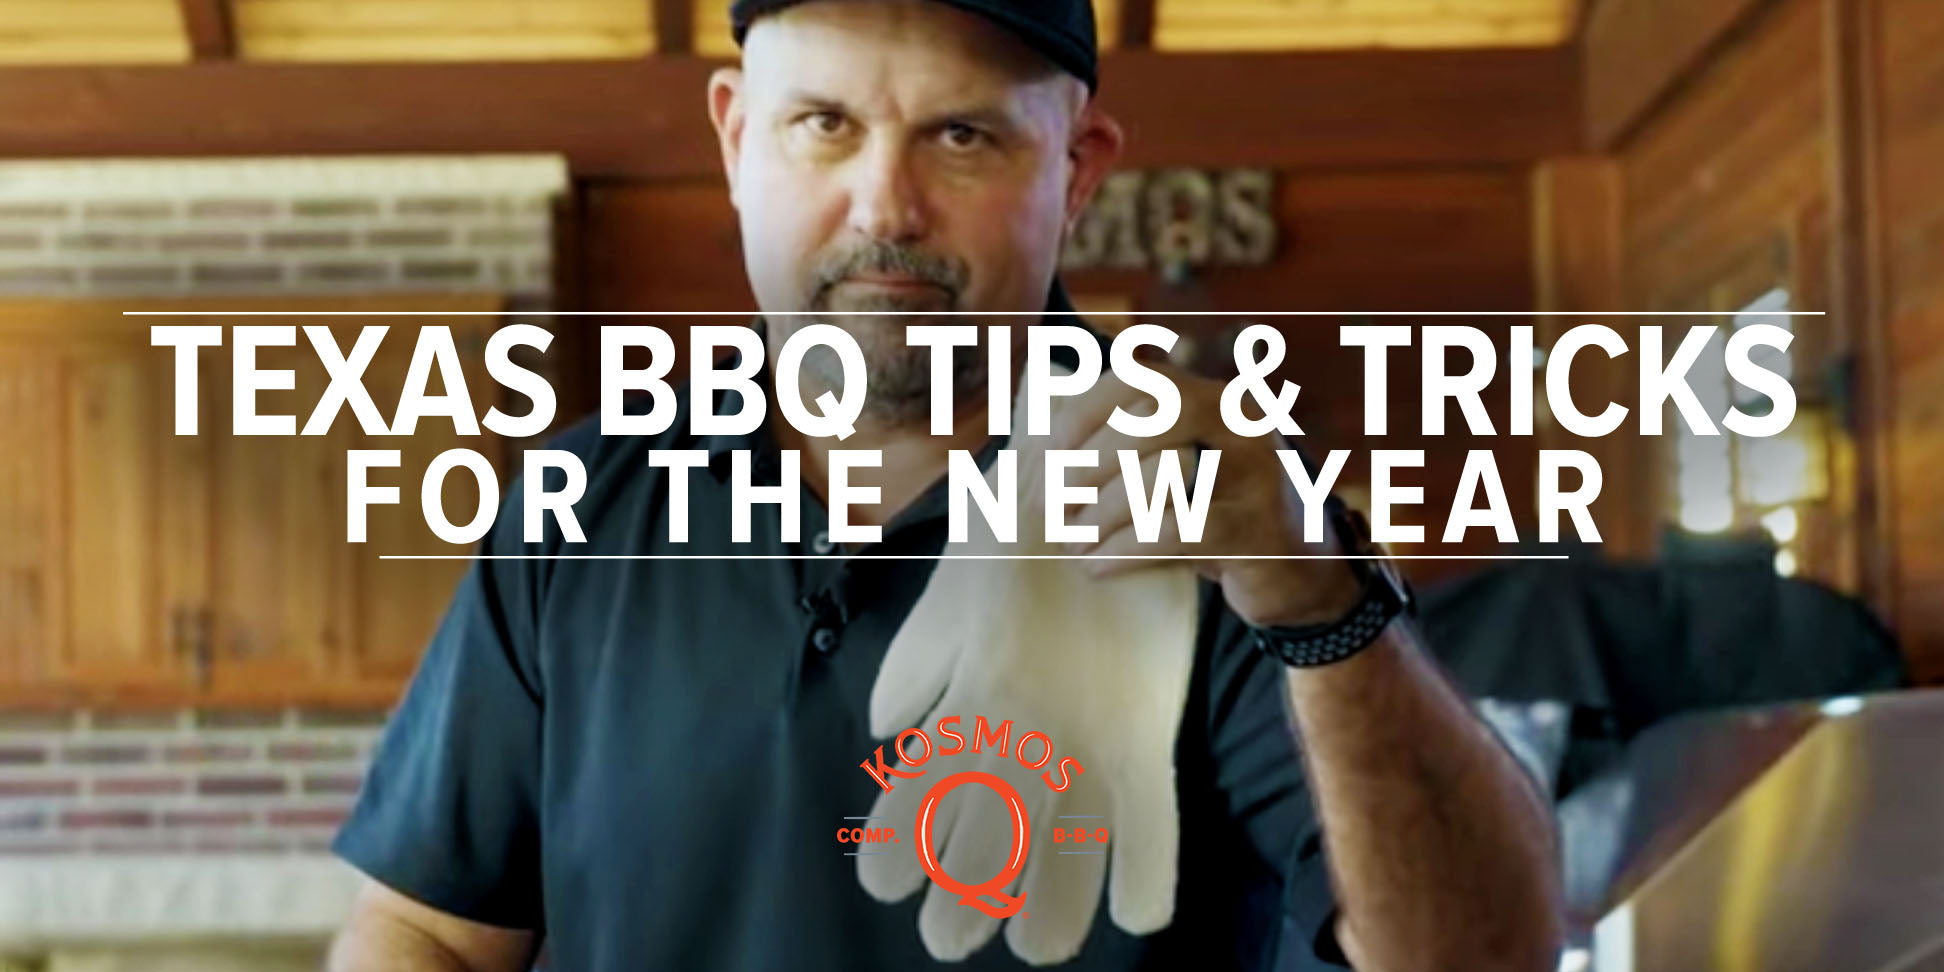 Texas BBQ Tips & Tricks for the New Year